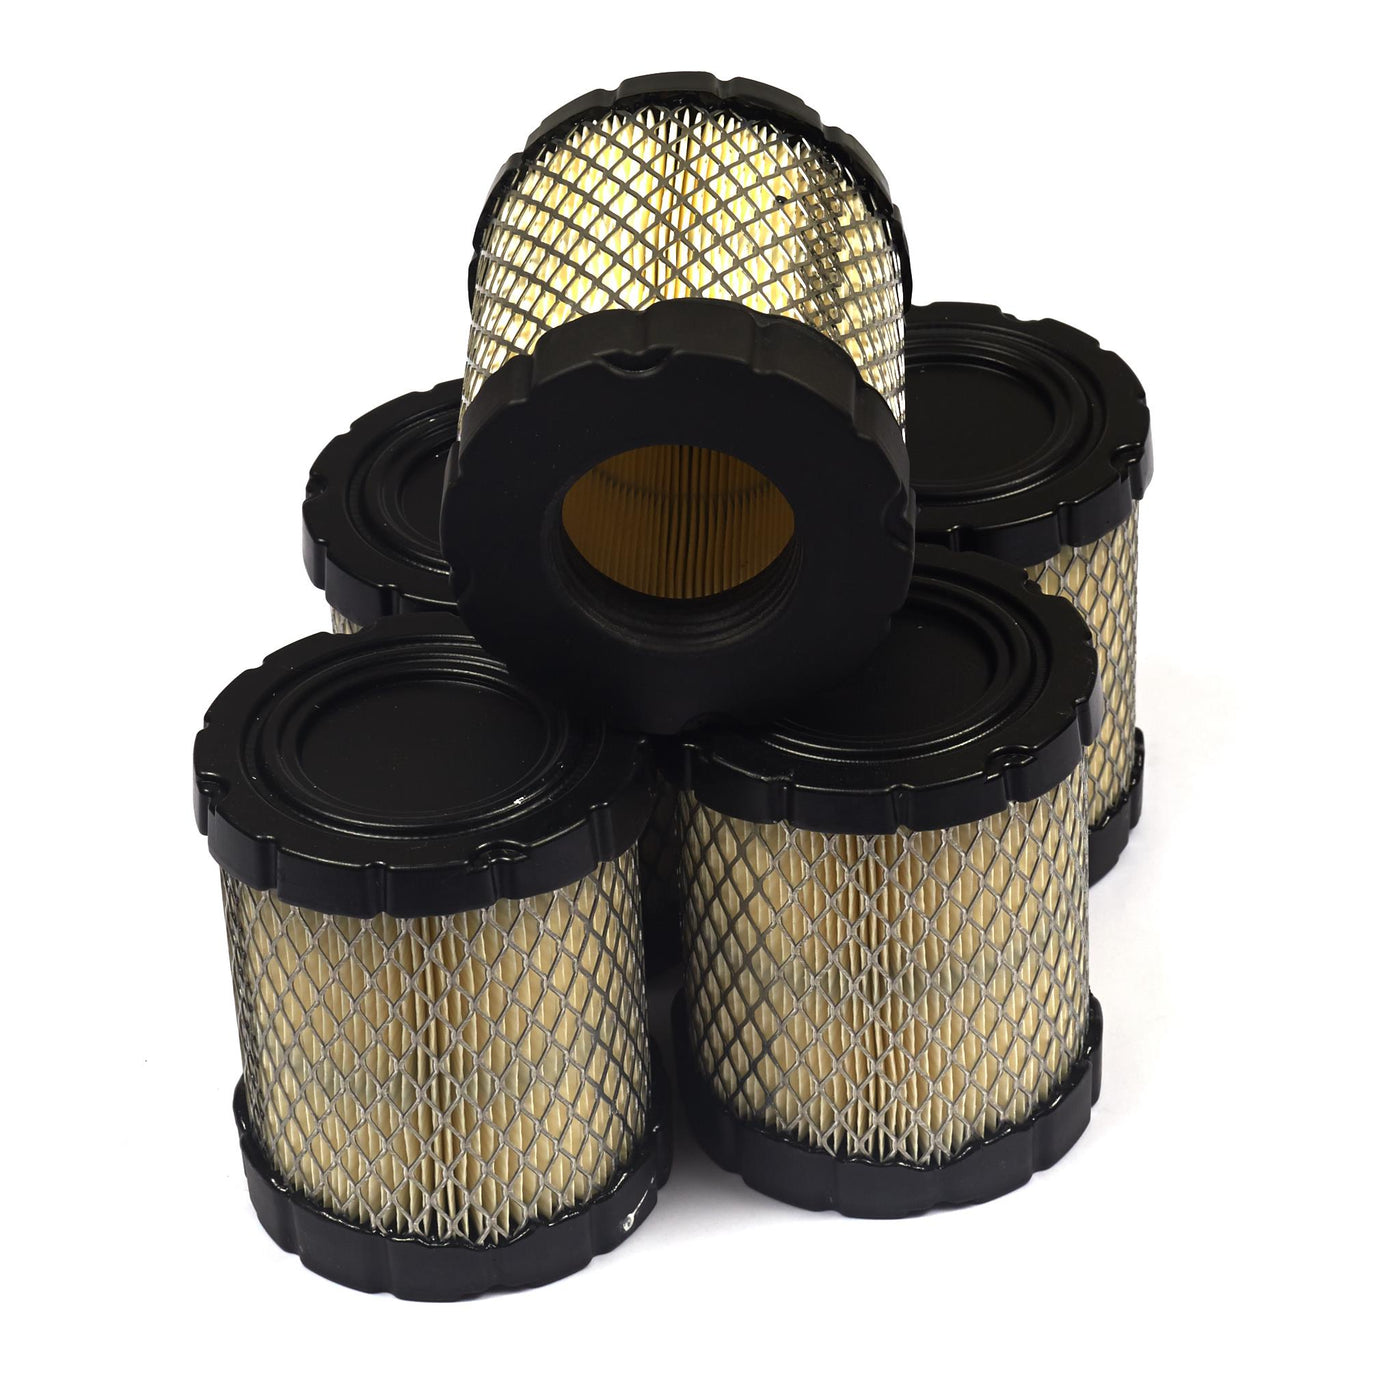 Briggs & Stratton 798897 Cyclonic Air Filter (5 Pack)